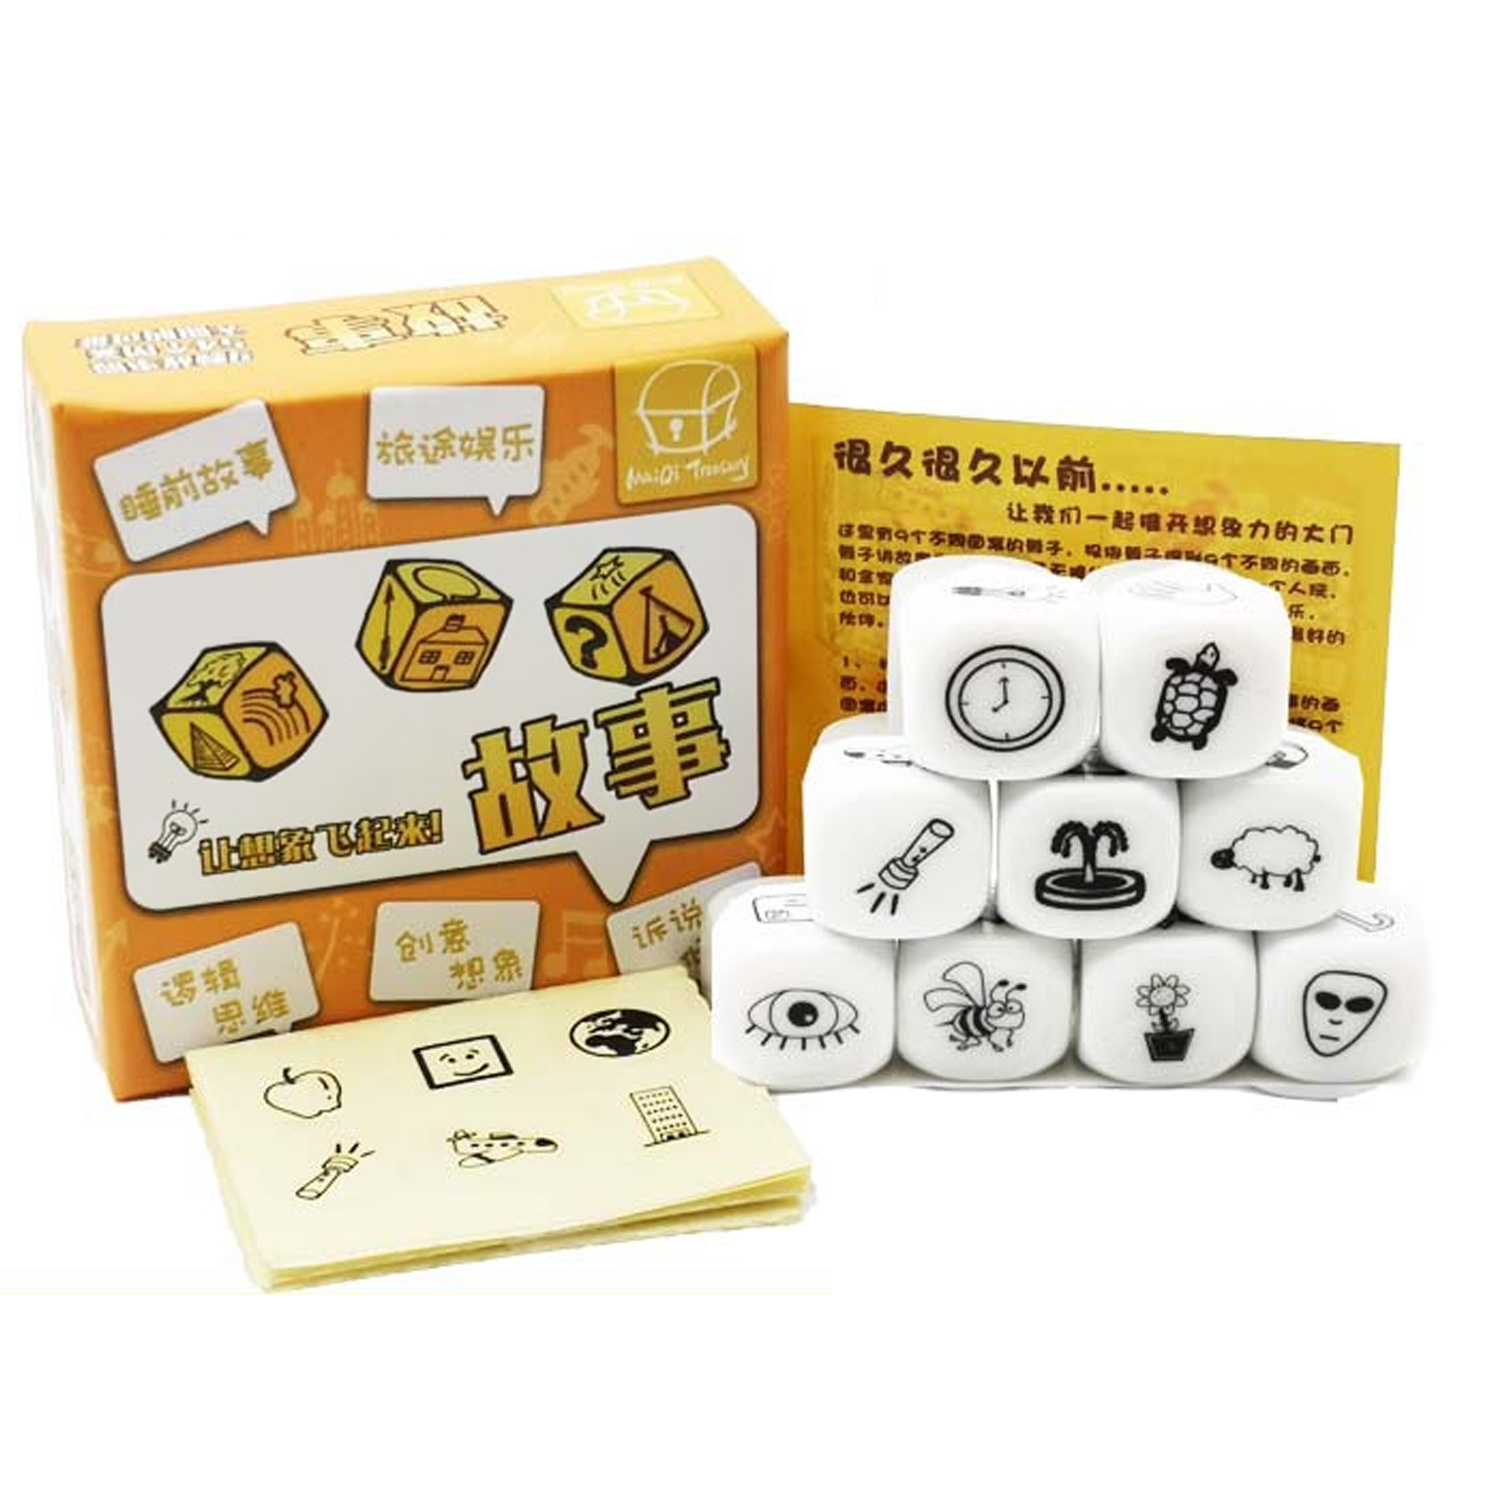 Happy Story Cubes Dice Toy Storytelling Game Imaginative for Family Kids Game G 